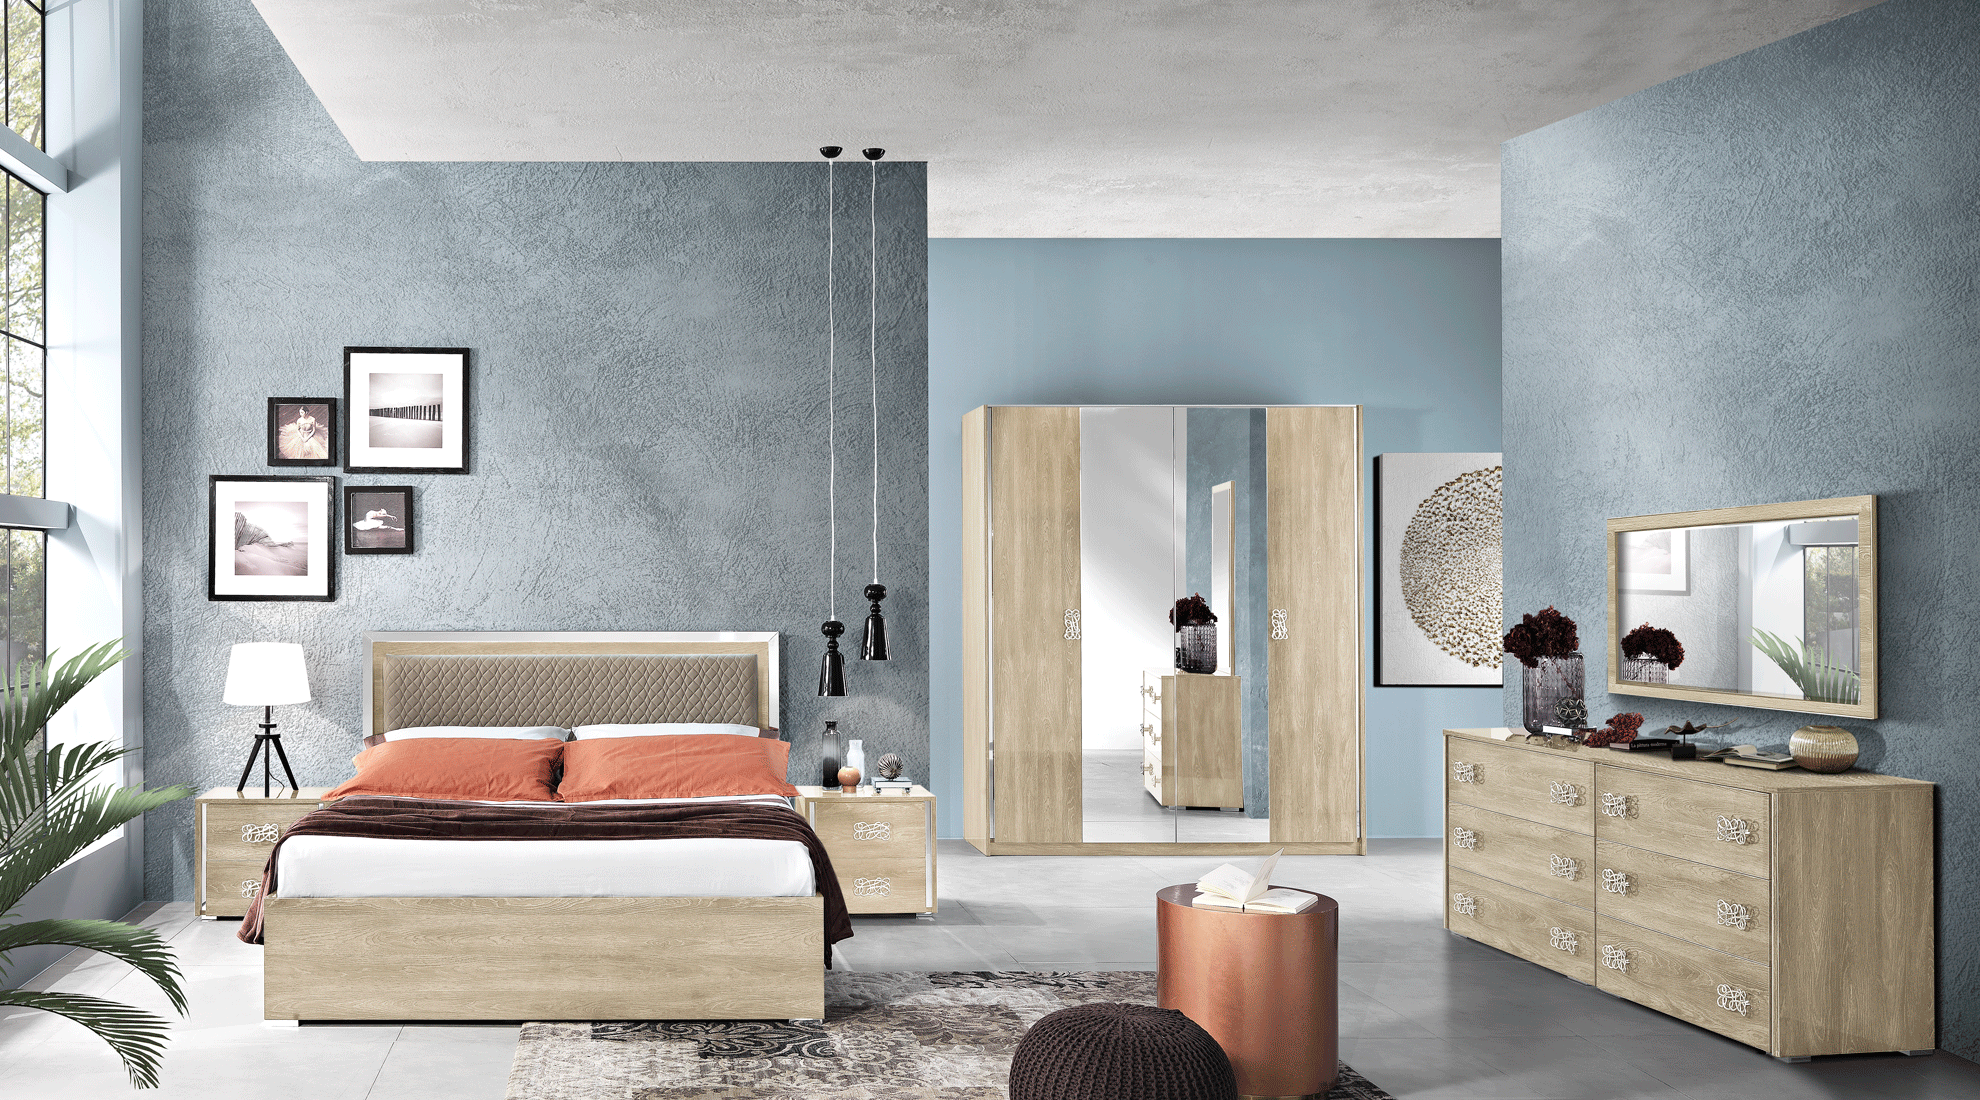 Brands MCS Classic Bedrooms, Italy Dover Beige Additional Items